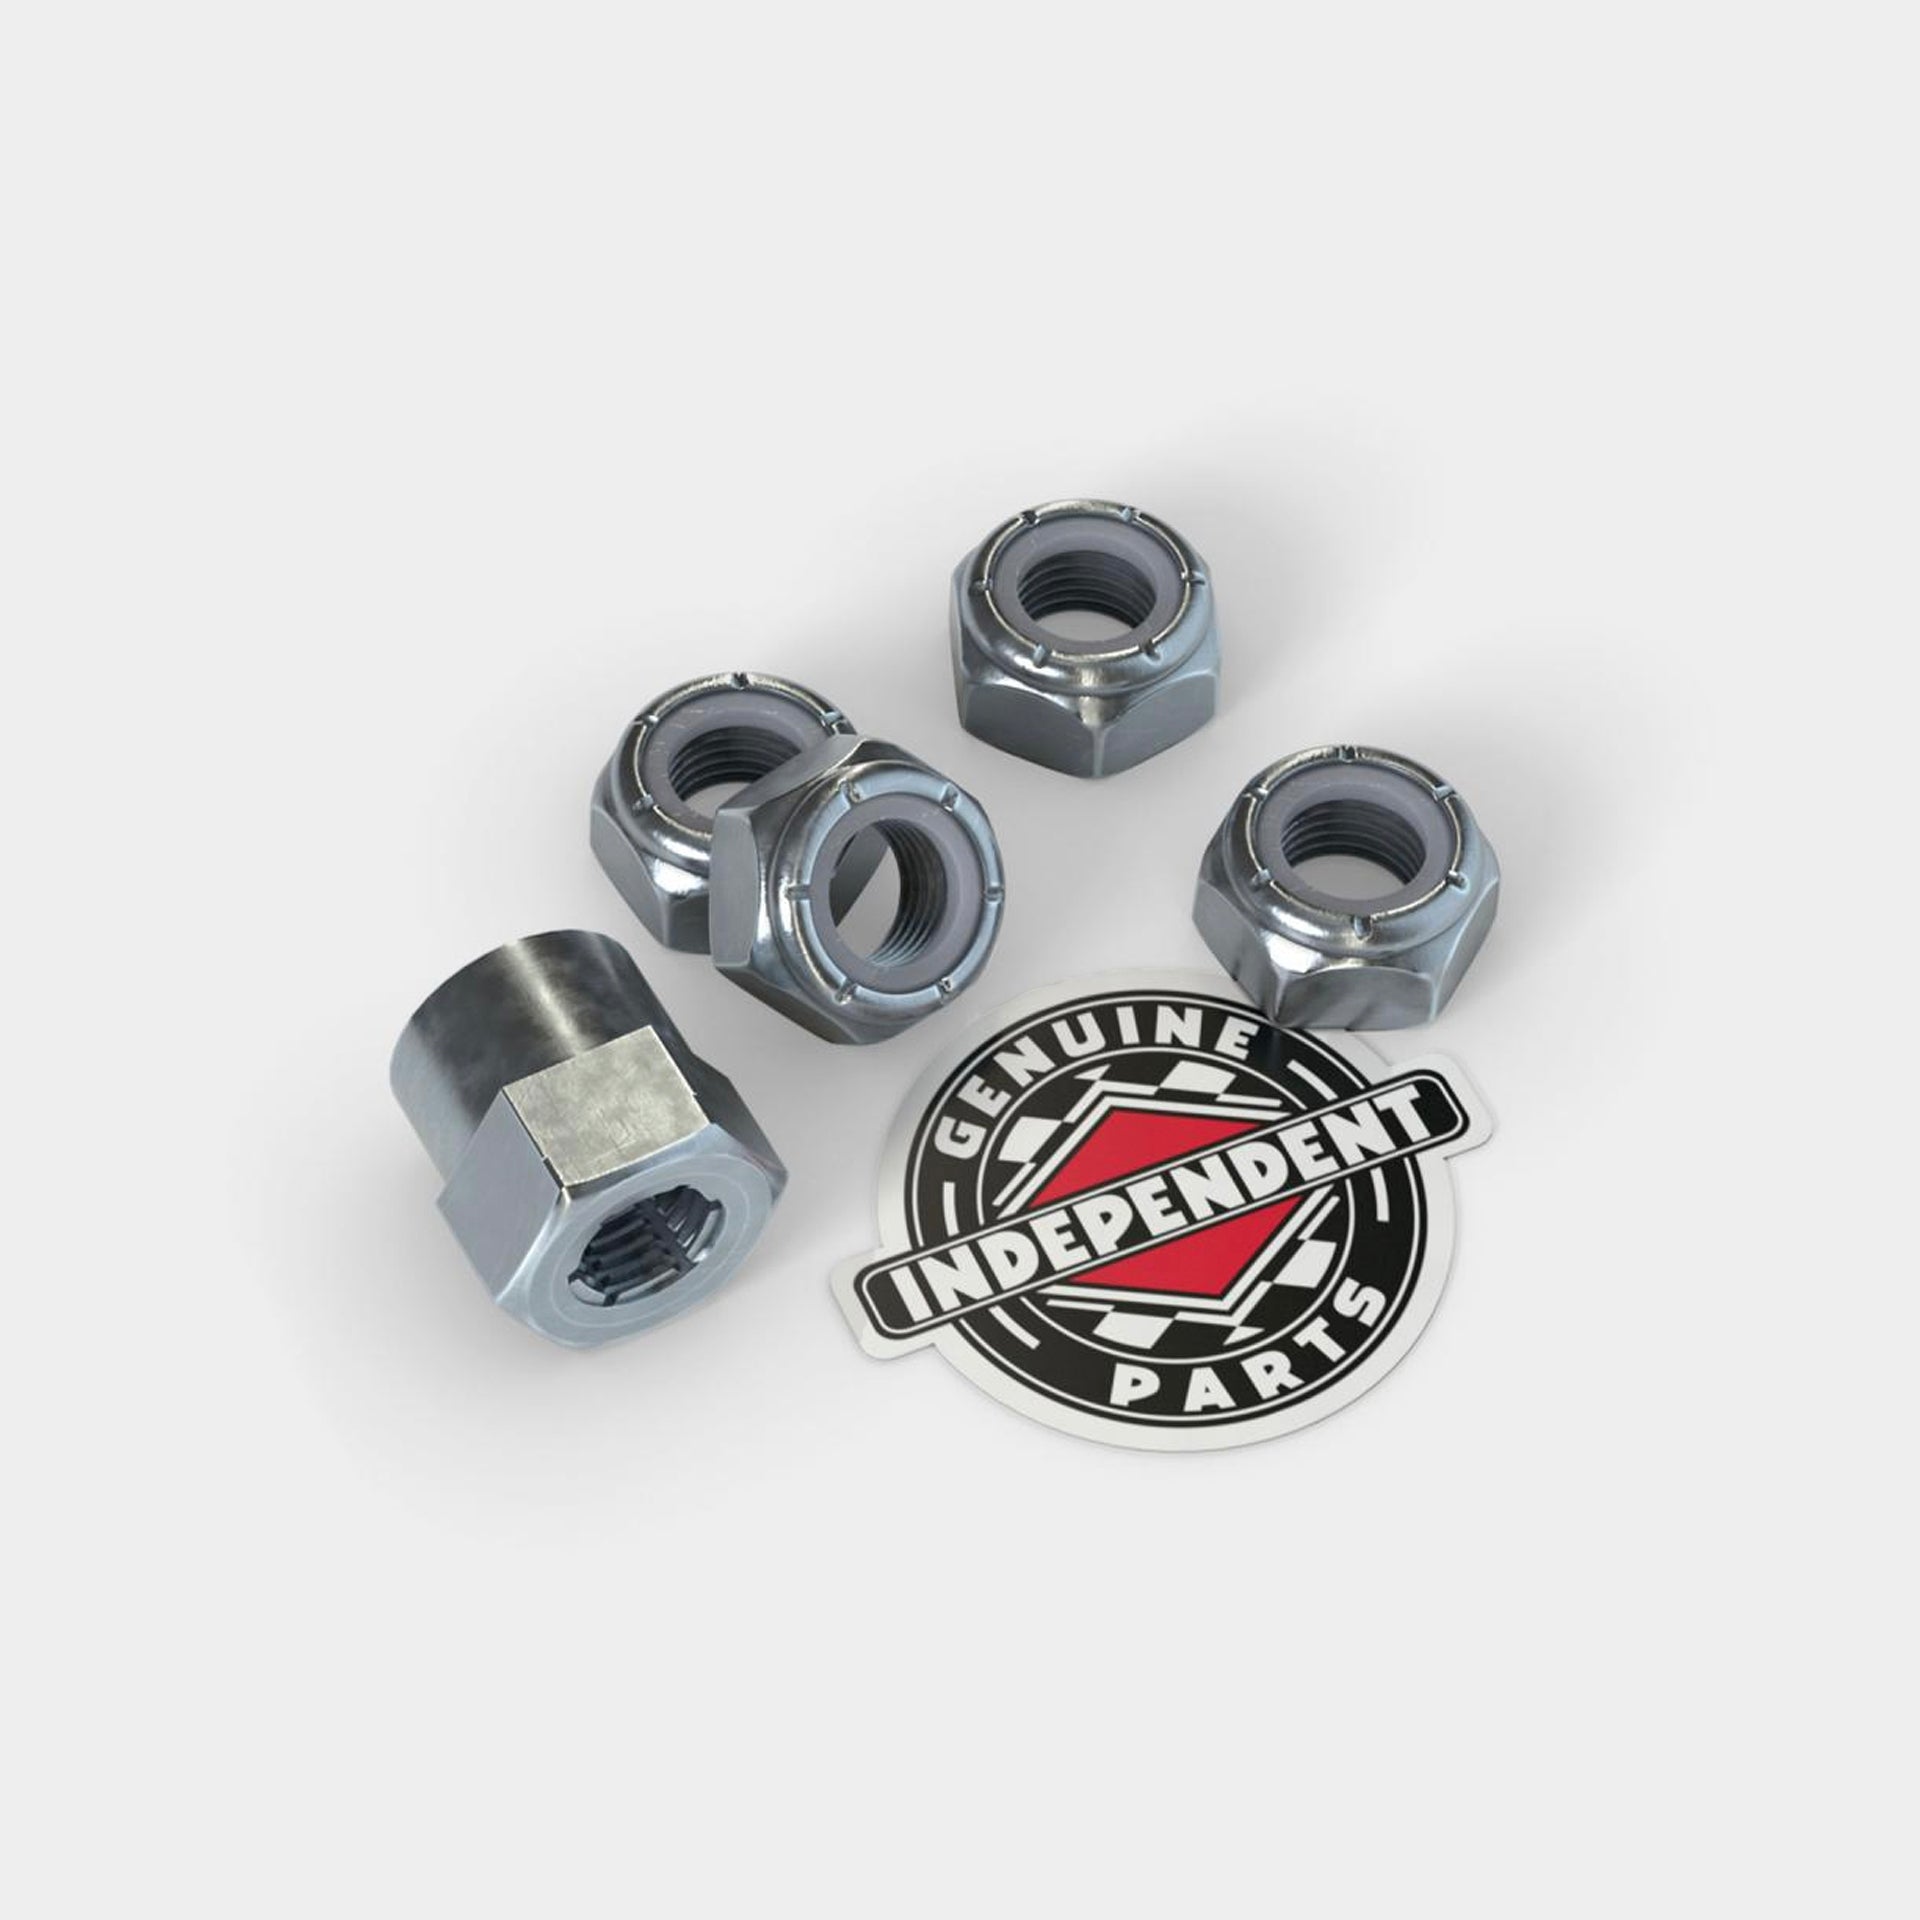 Independent Axle Rethreader + 4 Axle Nuts - Prime Delux Store